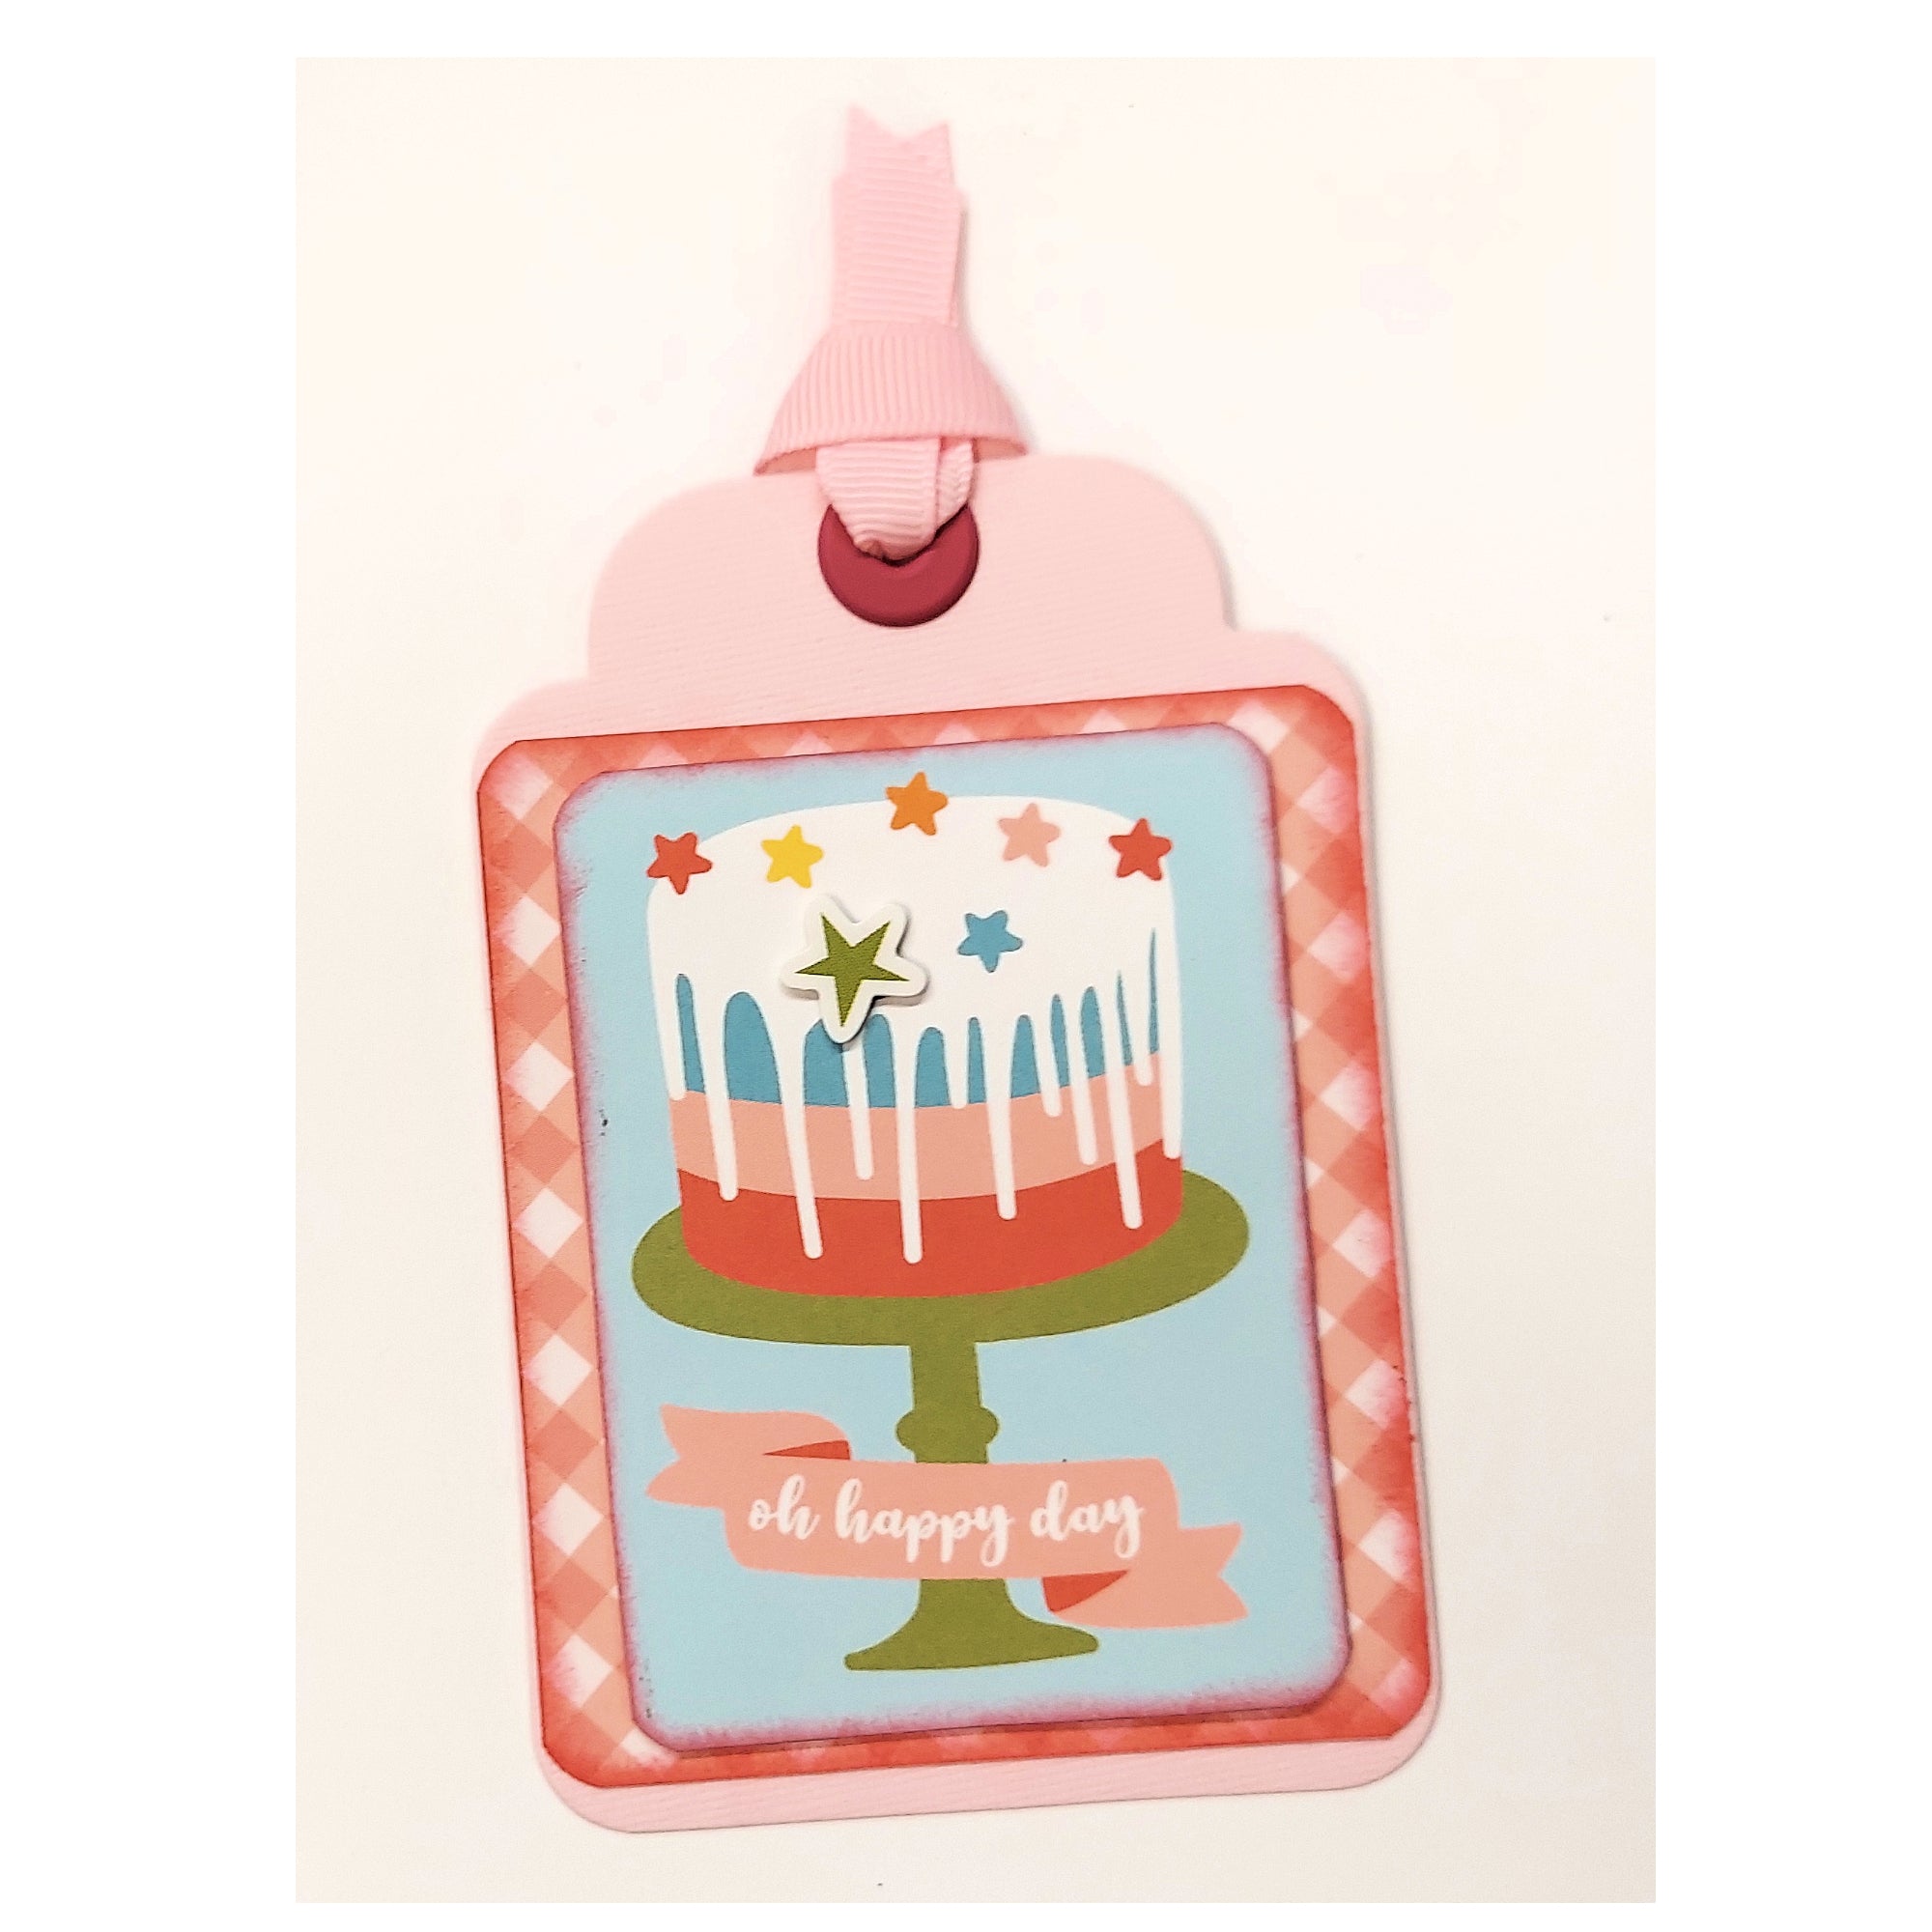 Oh Happy Day Tag 3 x 5 Coordinating Scrapbook Tag Embellishment by SSC Designs